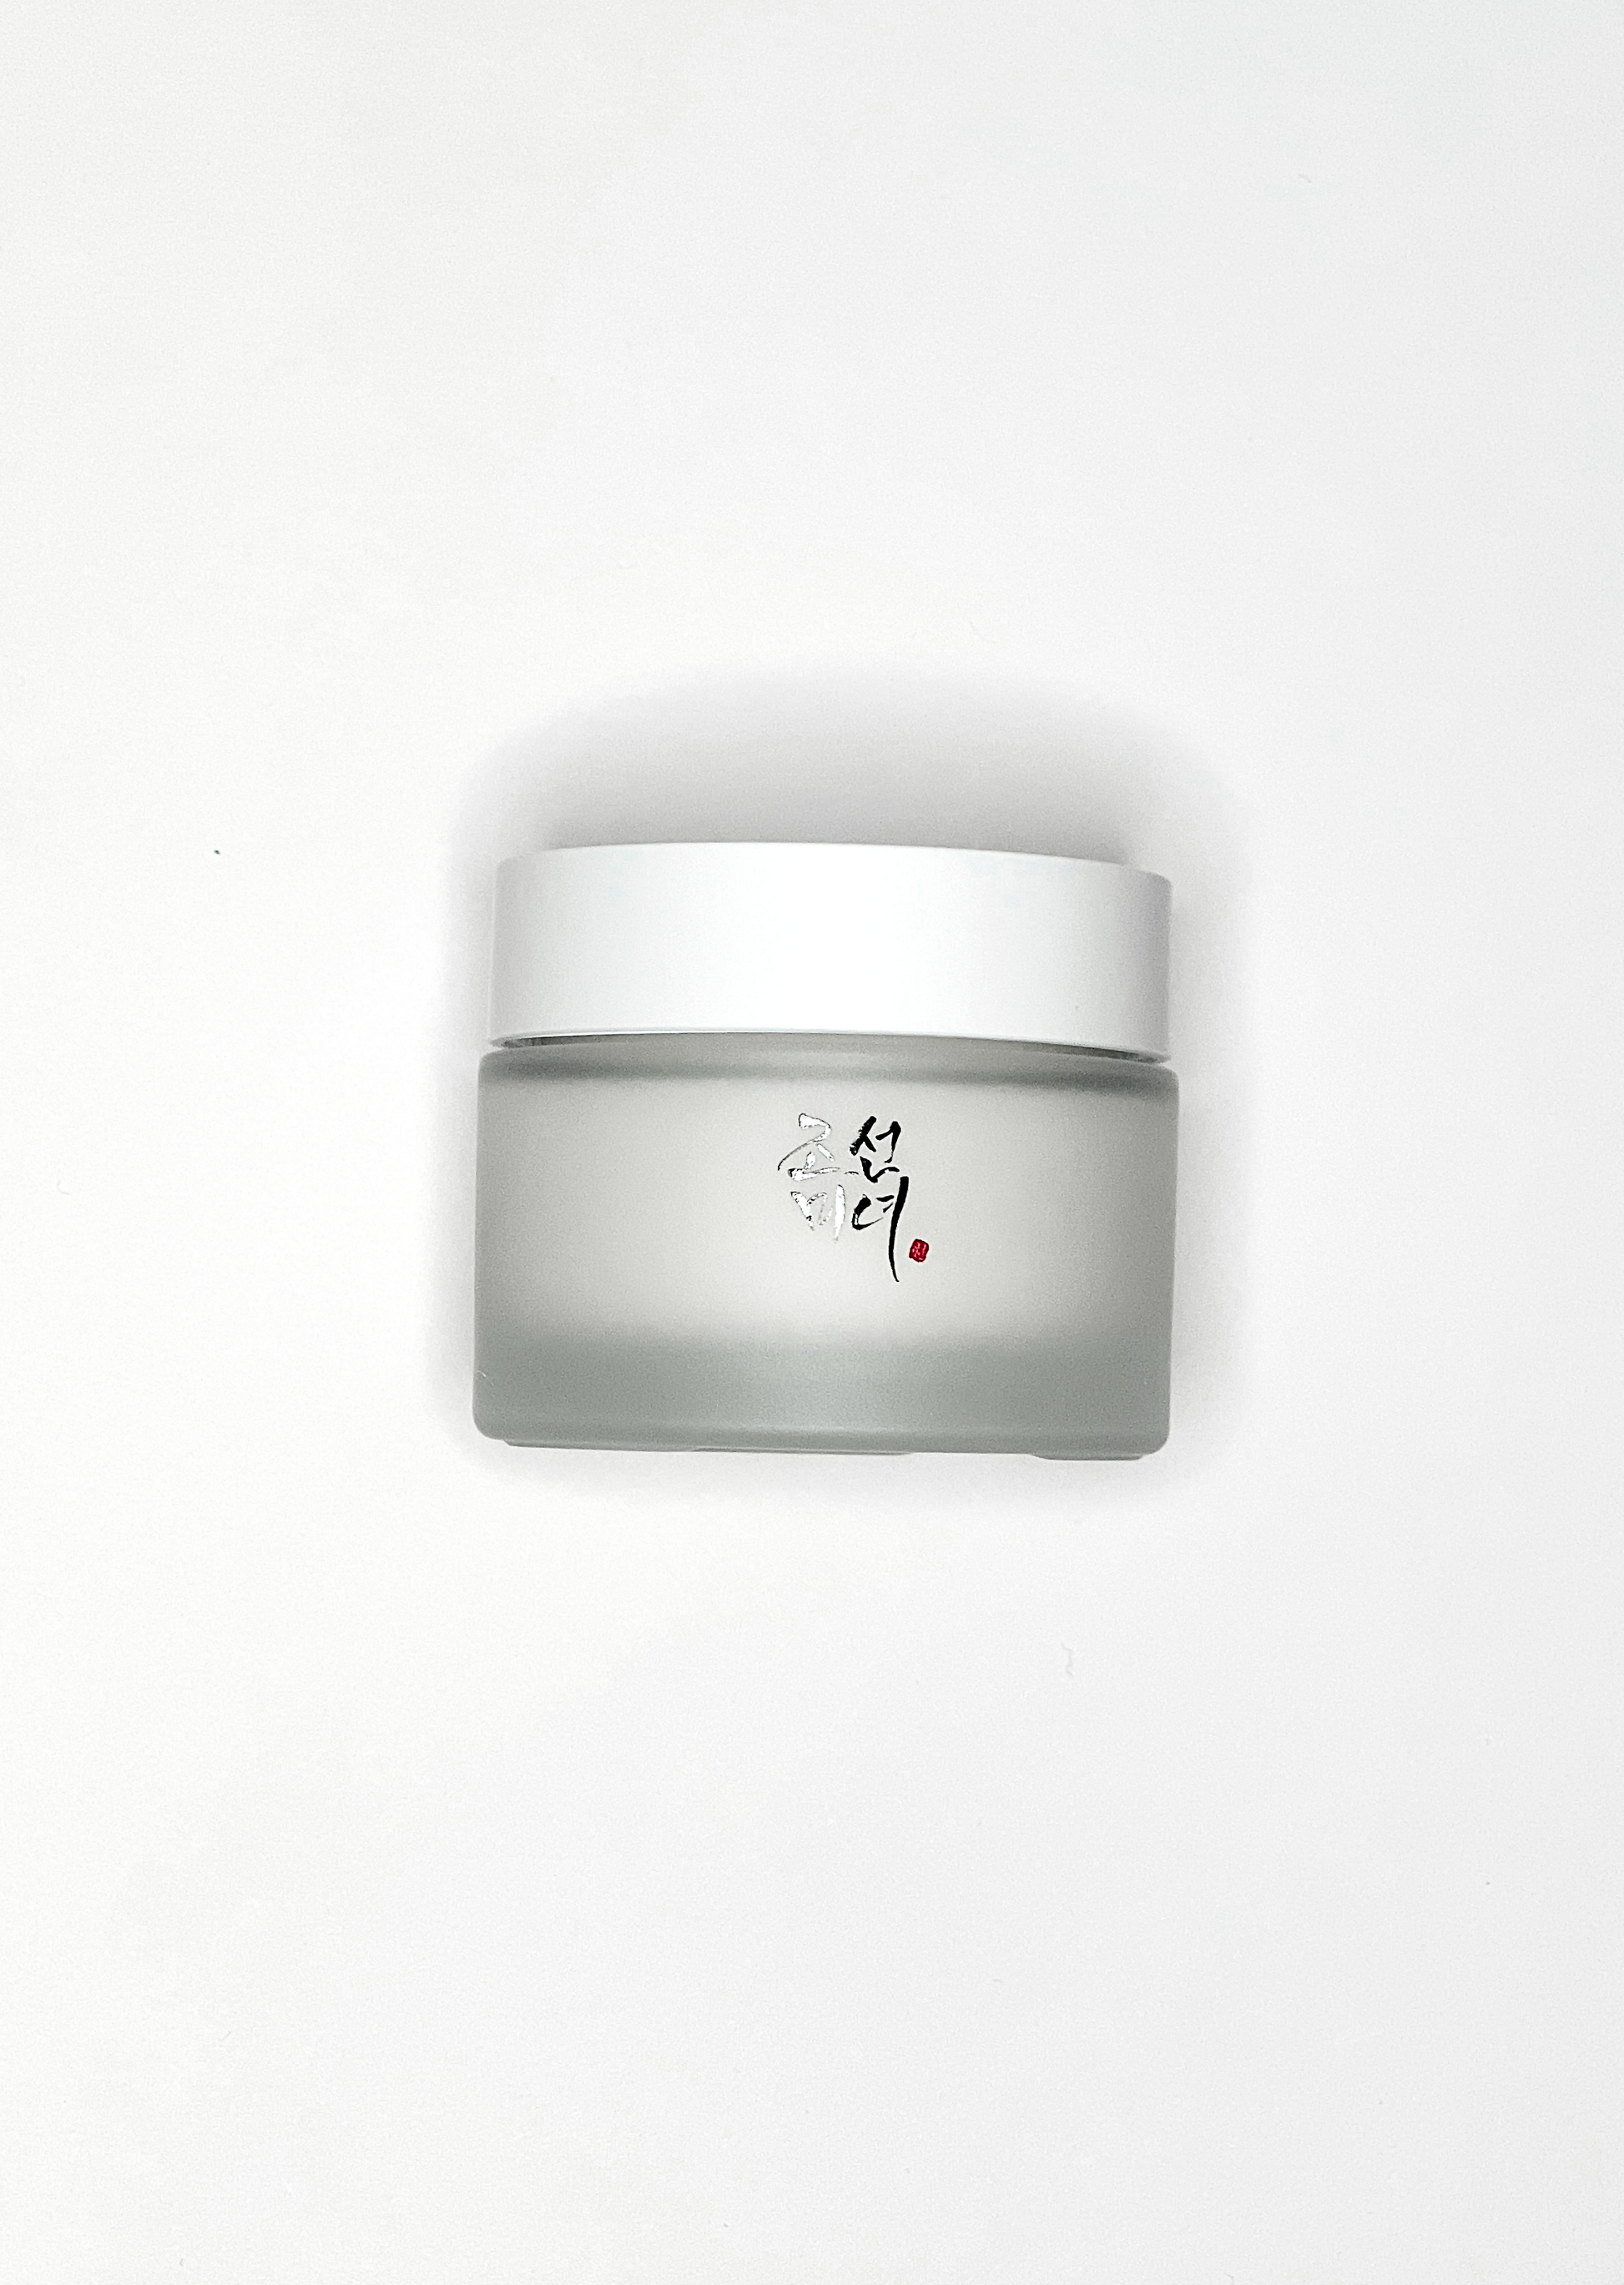 Luxurious korean skincare moisturizer. Beauty of Joseon dynasty cream is enriched with hanbang ingredients.